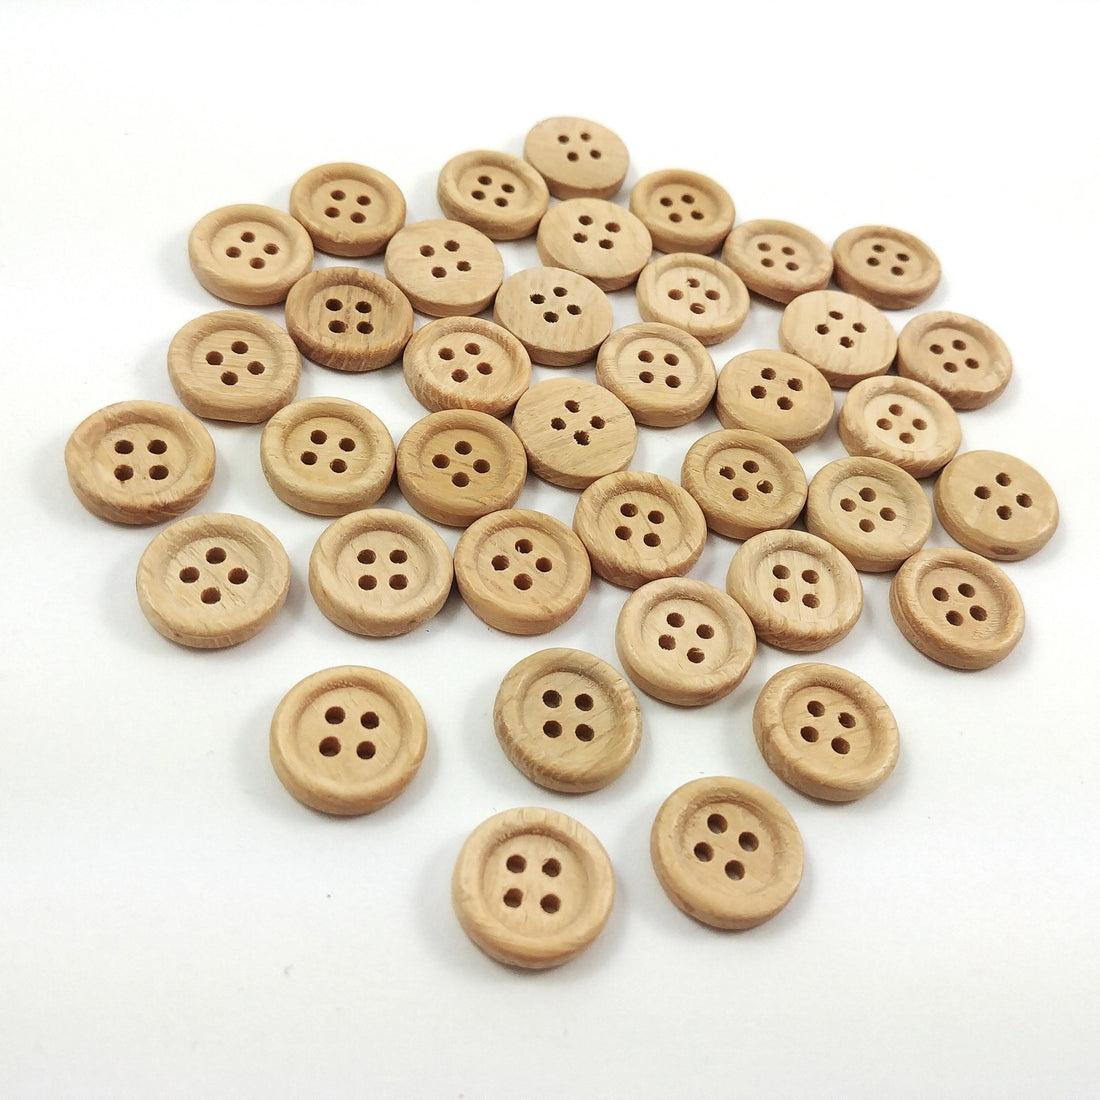 Rustic unfinished wood button set of 36 small buttons 13mm